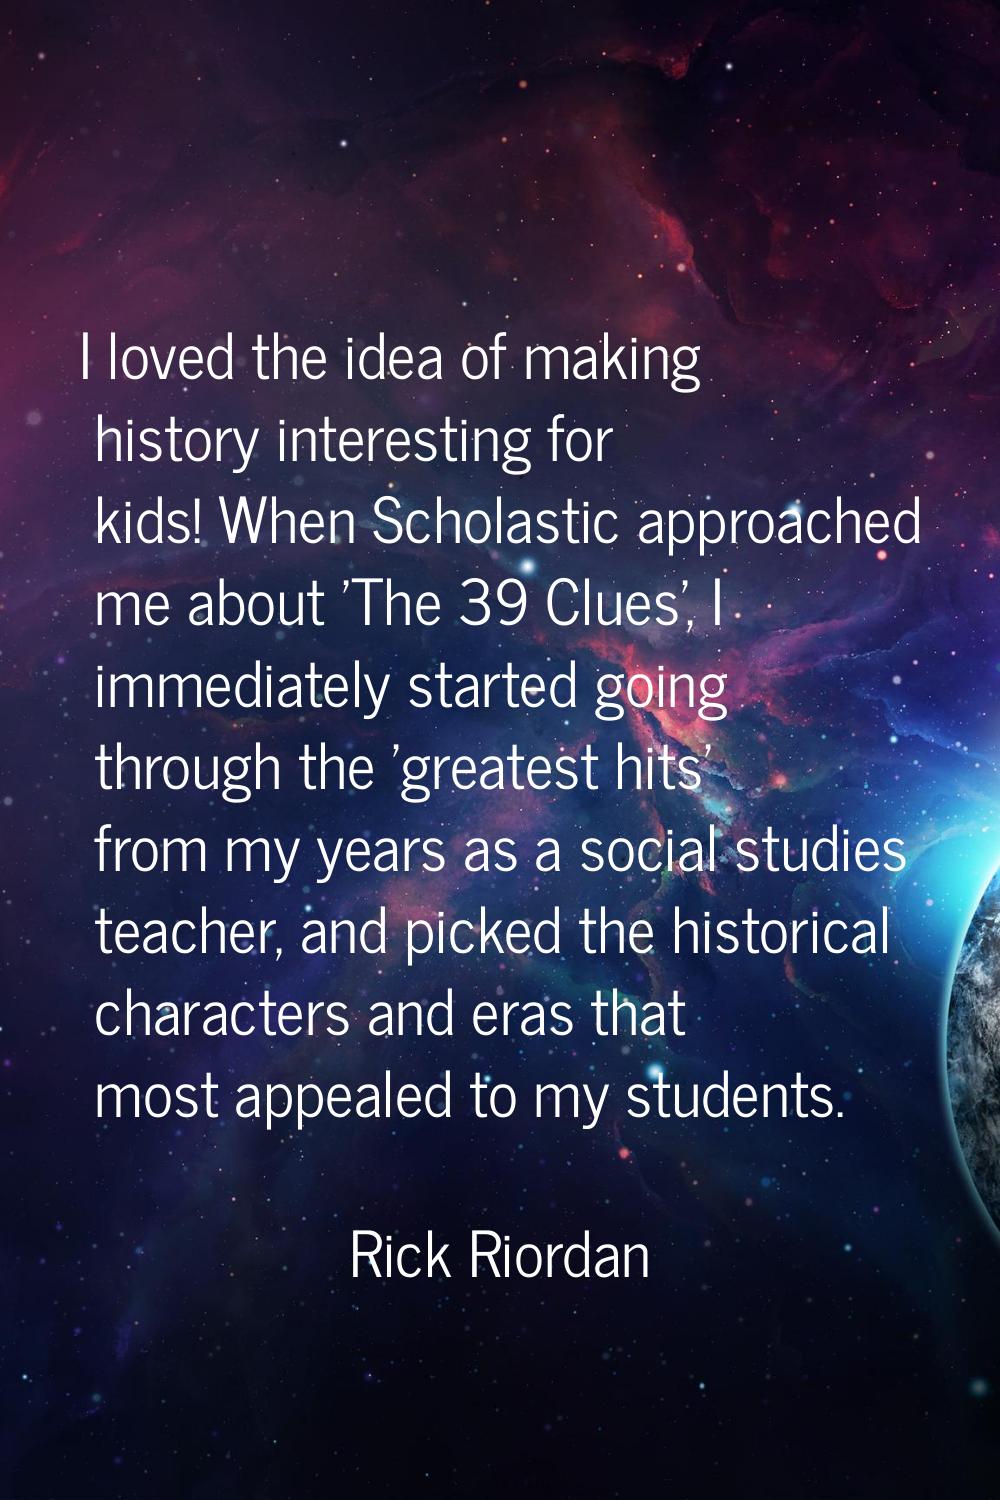 I loved the idea of making history interesting for kids! When Scholastic approached me about 'The 3